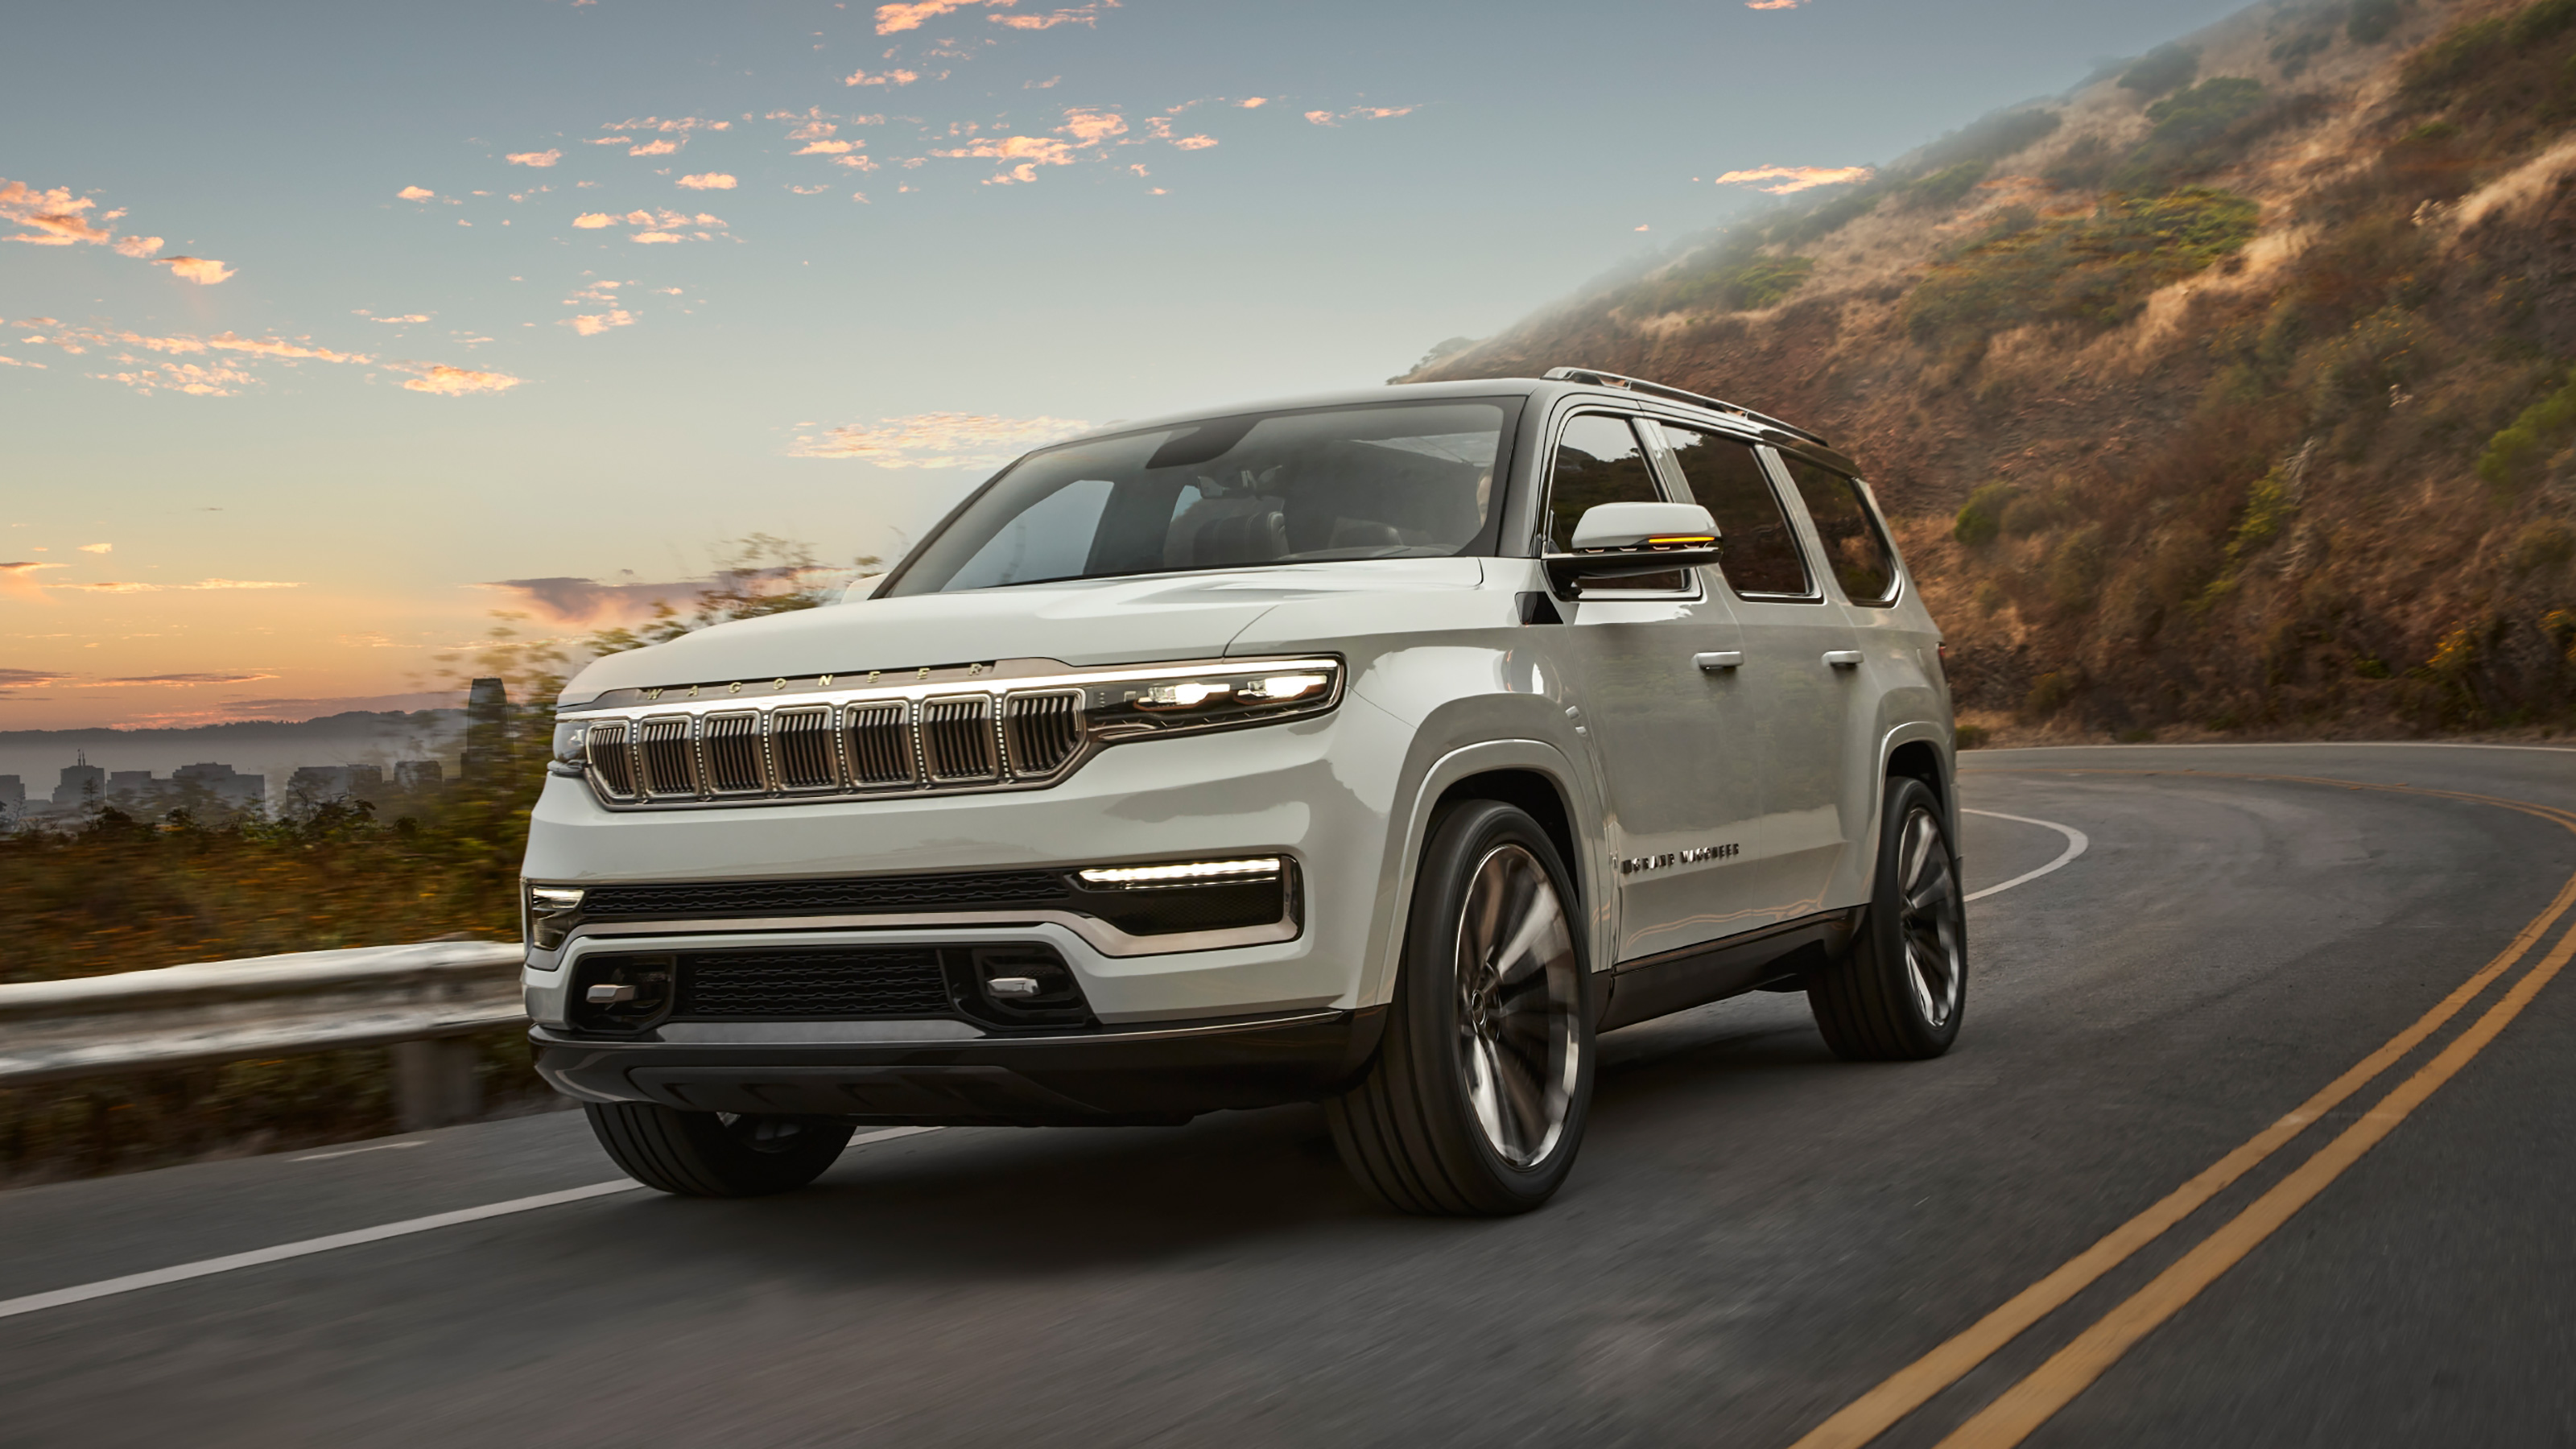 New 2022 Jeep Grand Wagoneer launched Auto Express